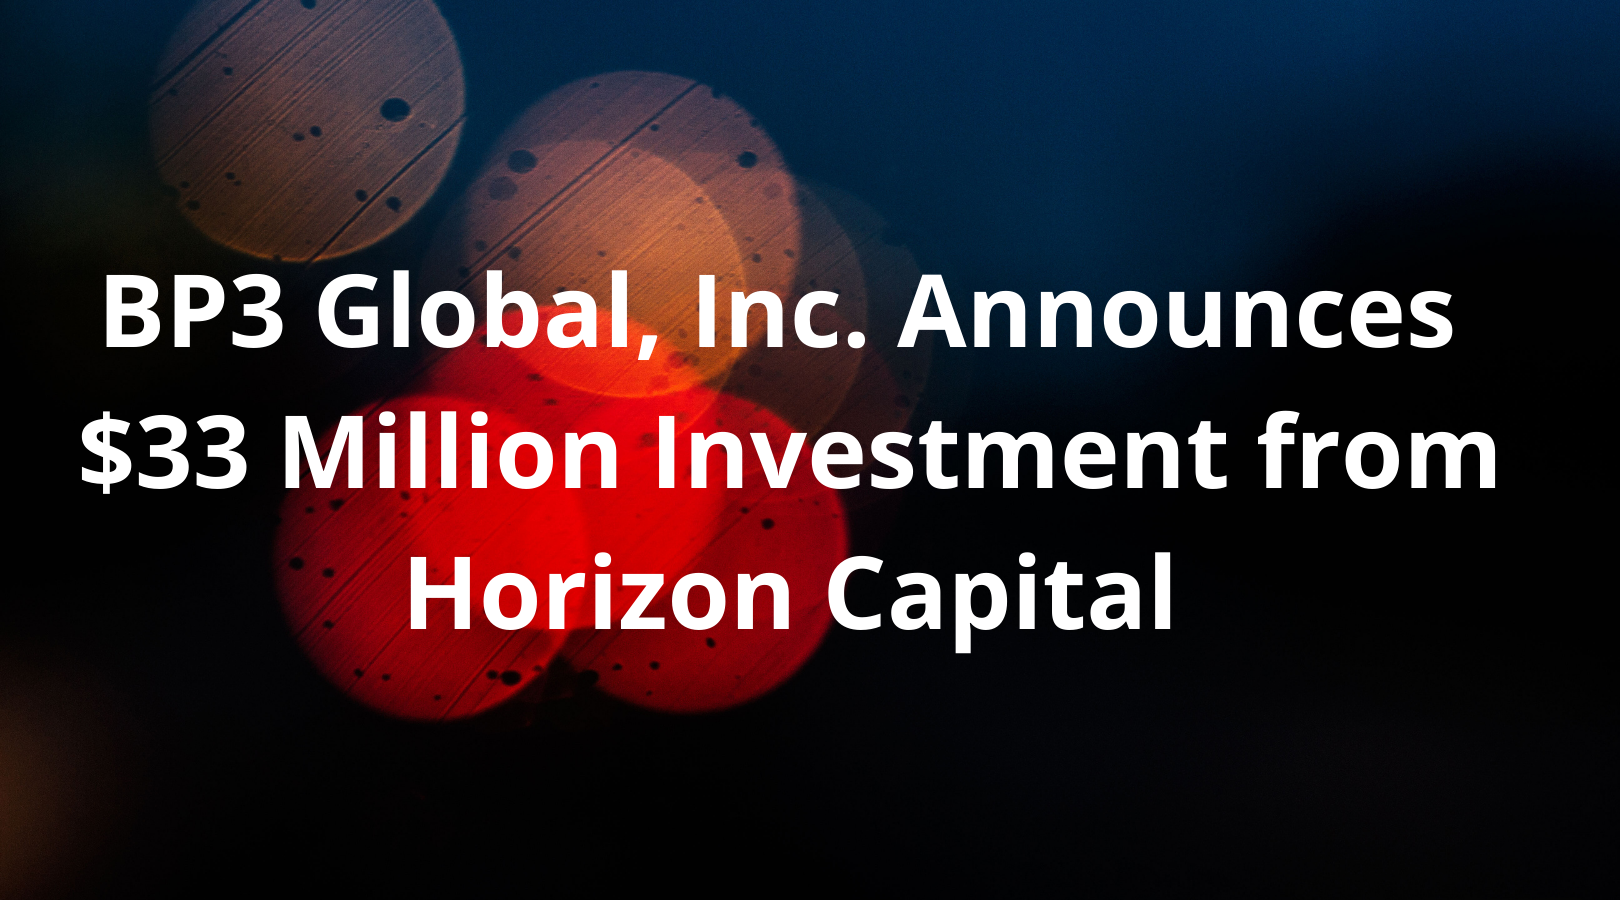 For Release: BP3 Global Announces a $33 Million Growth Investment by Horizon Capital